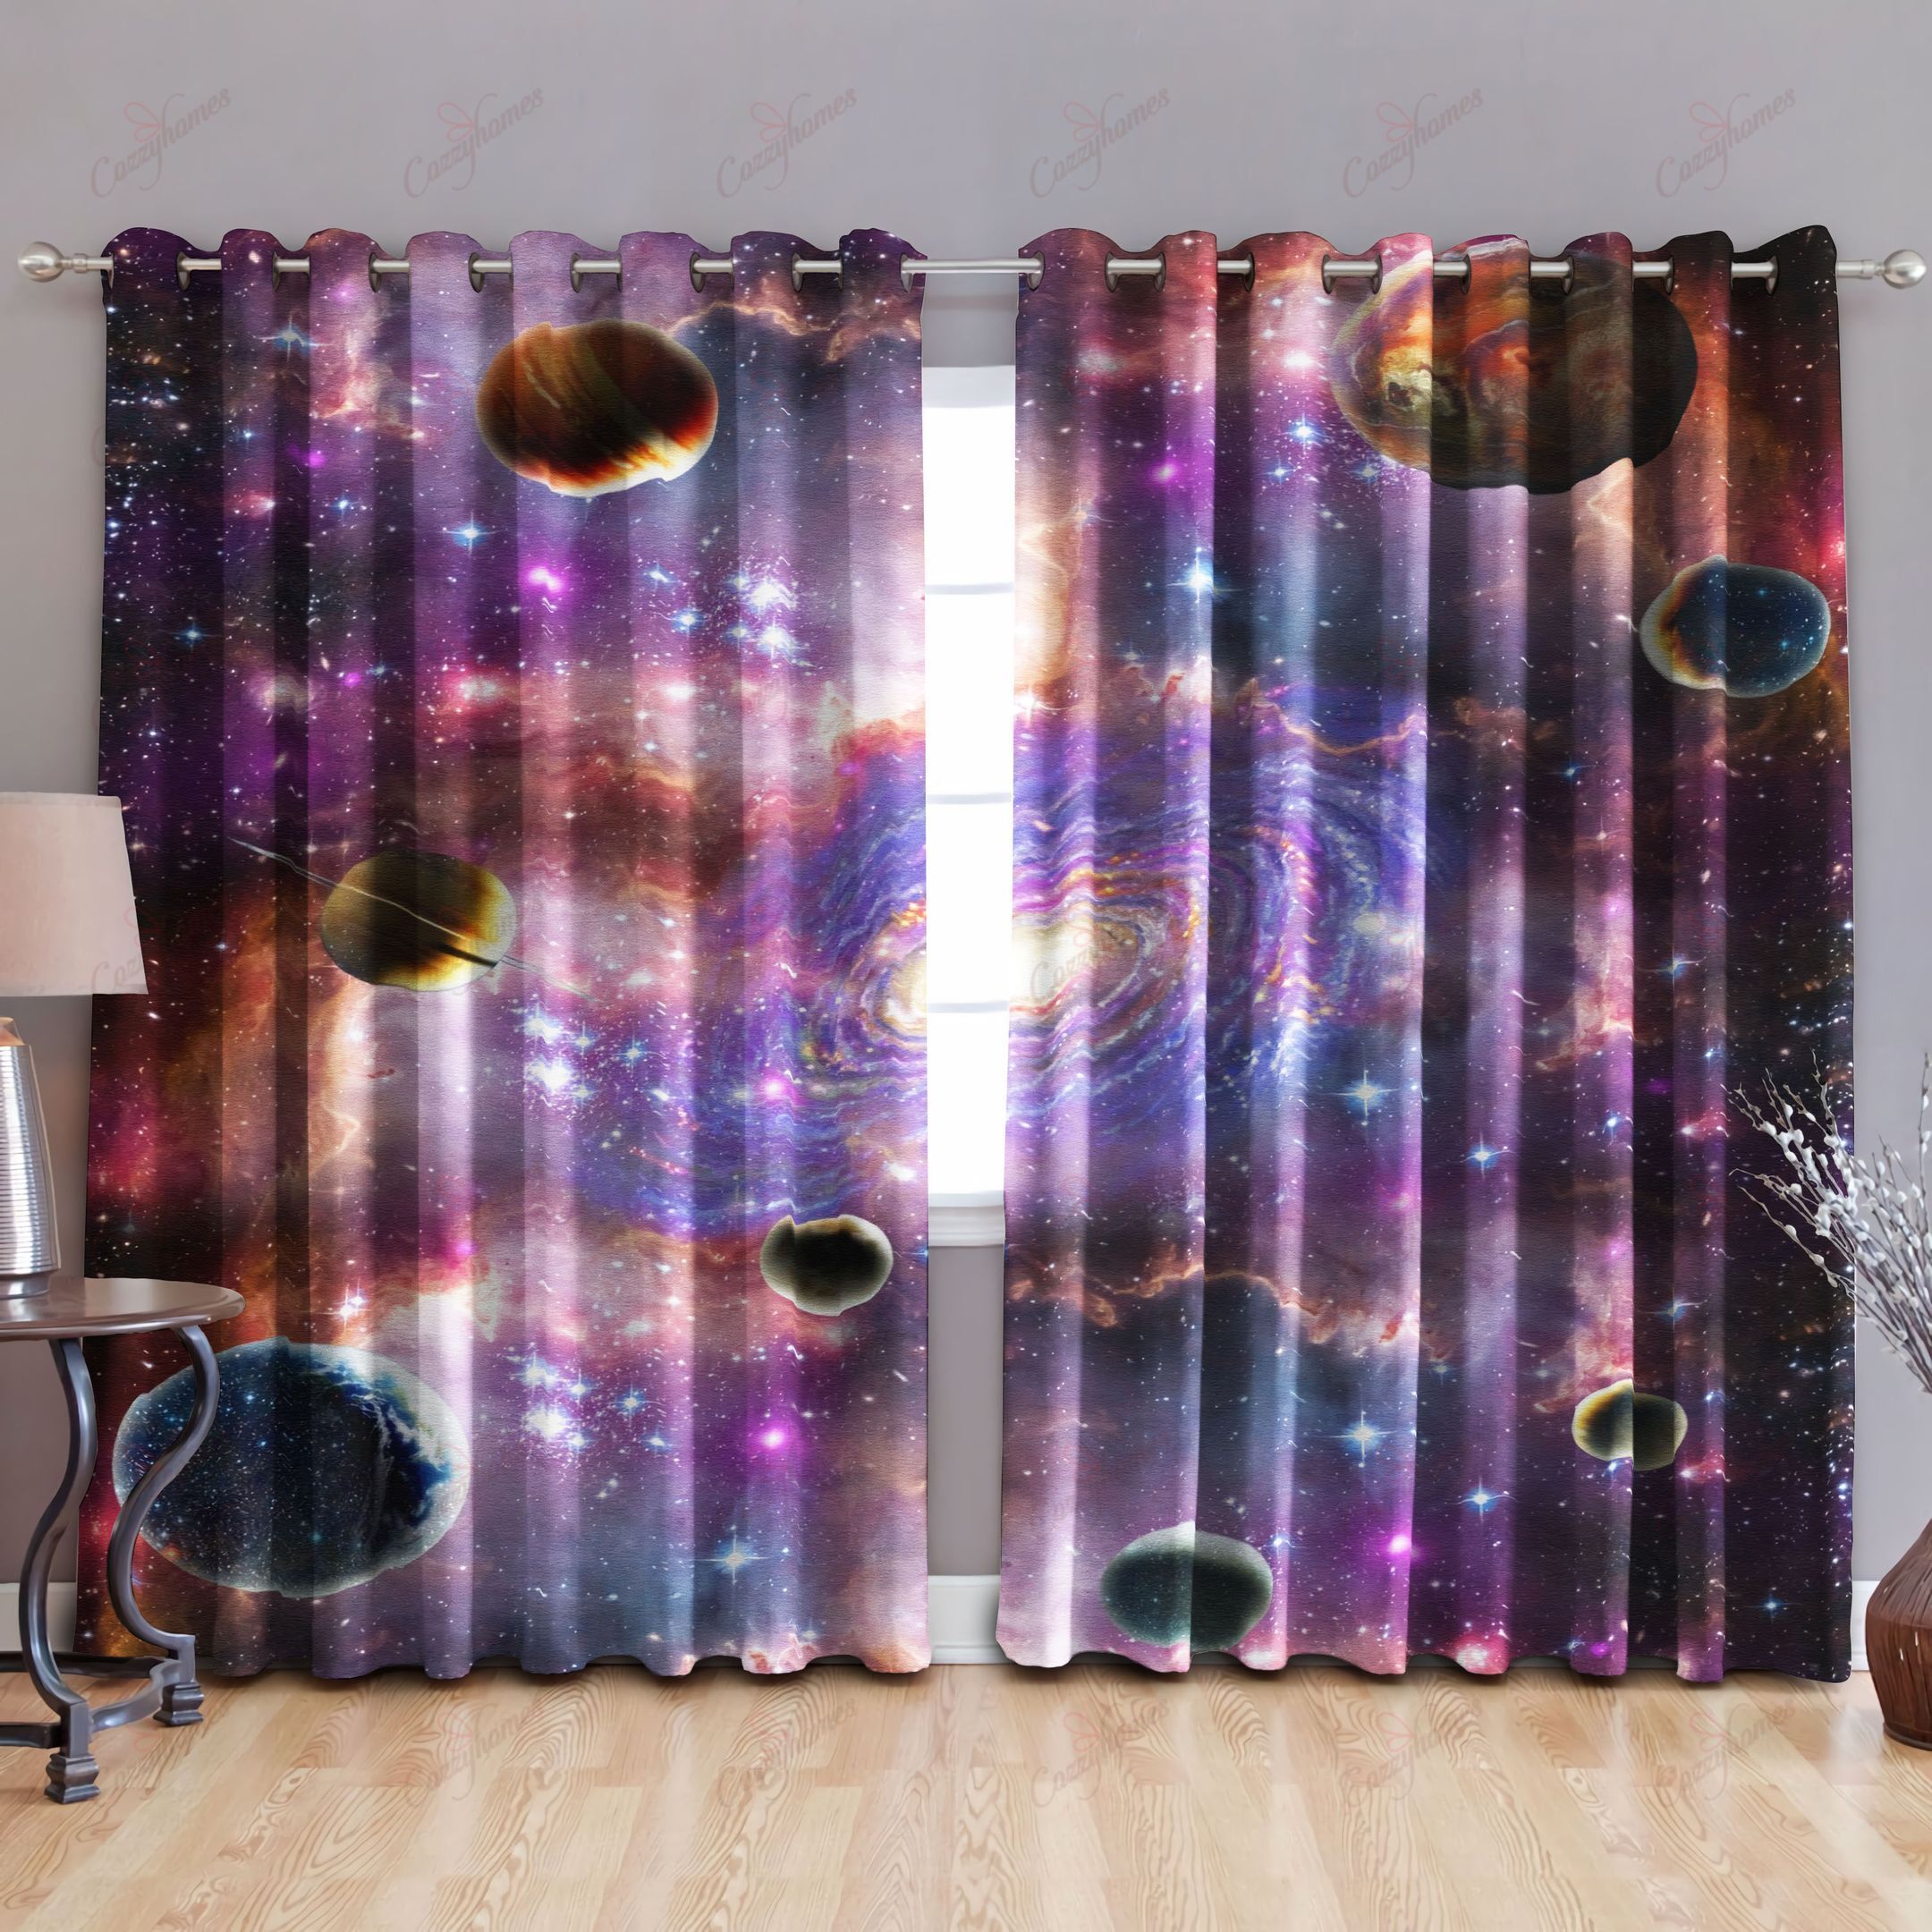 Galaxy planets solar system blackout thermal grommet window curtains ...